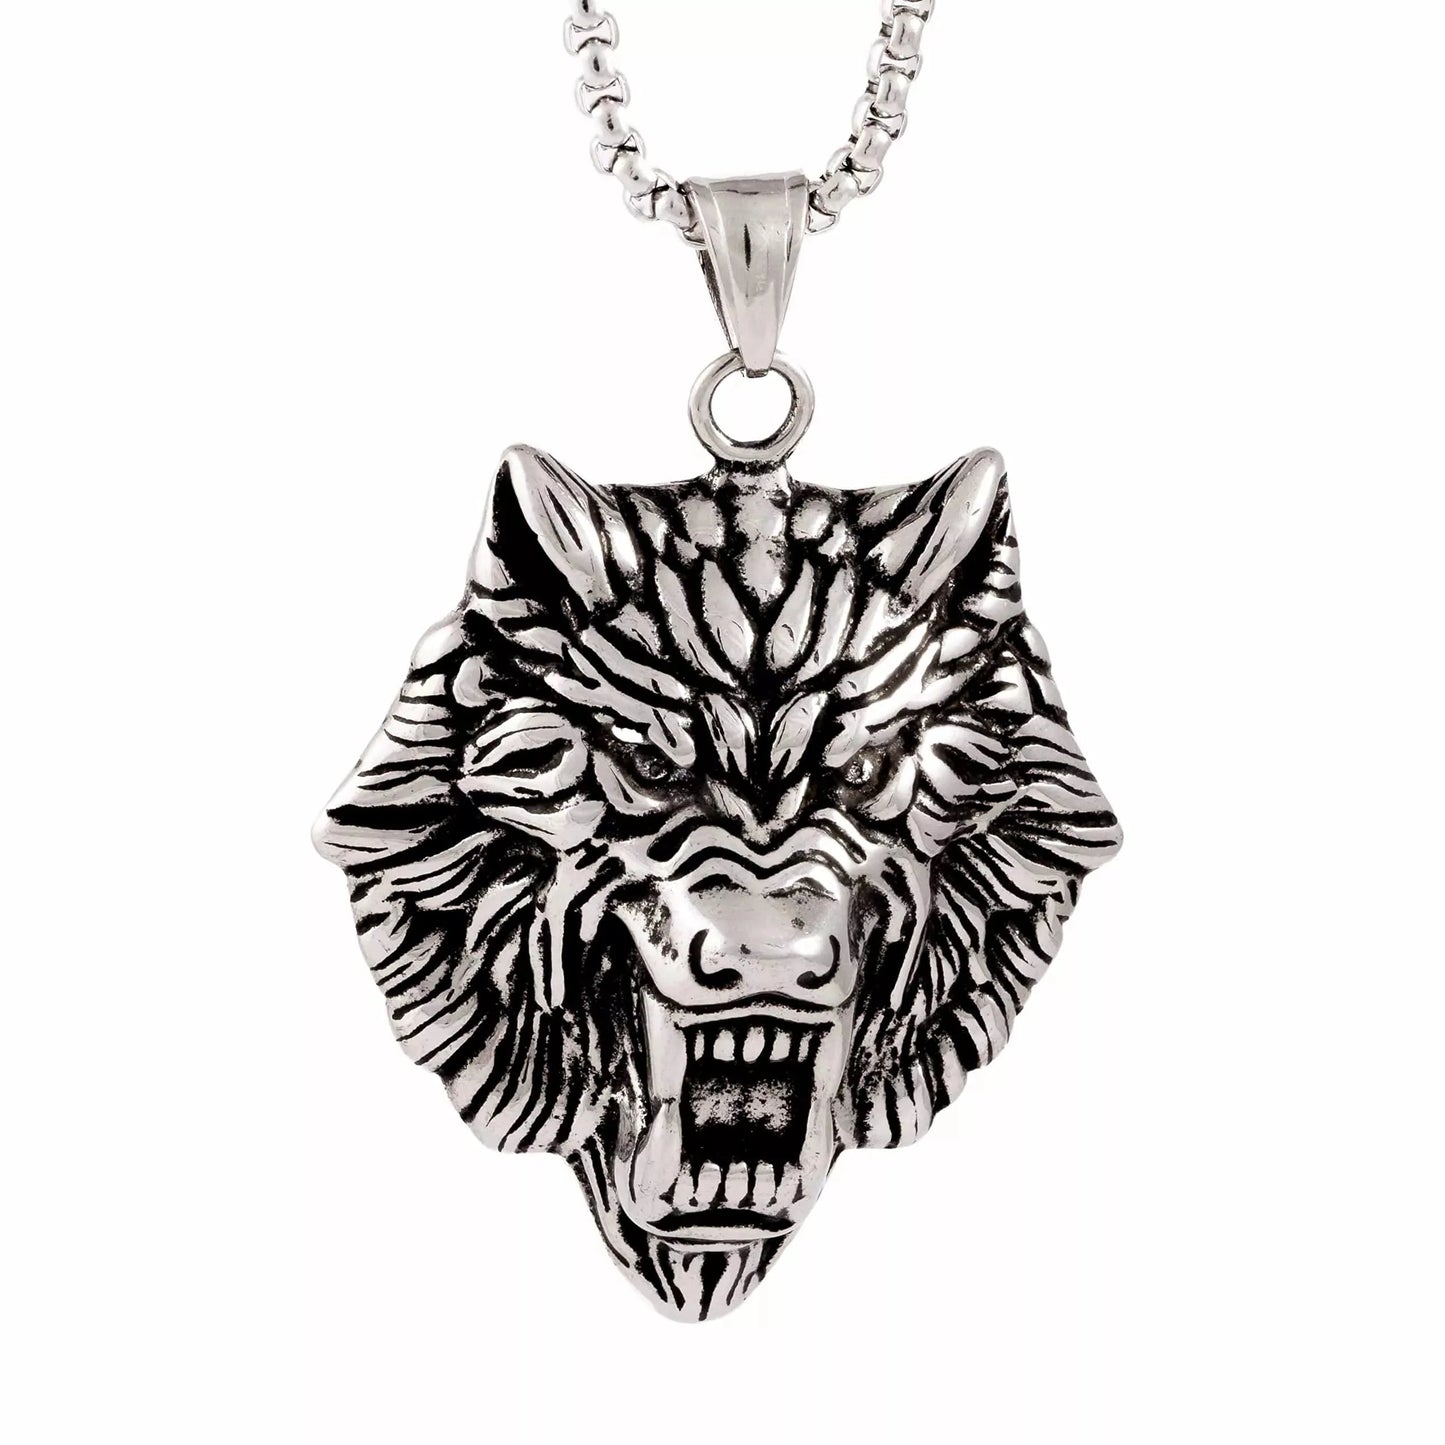 THE MEN THING Pendant for Men - Pure Titanium Steel Wolf Pendant with 24inch Round Box Chain for Men & Boys